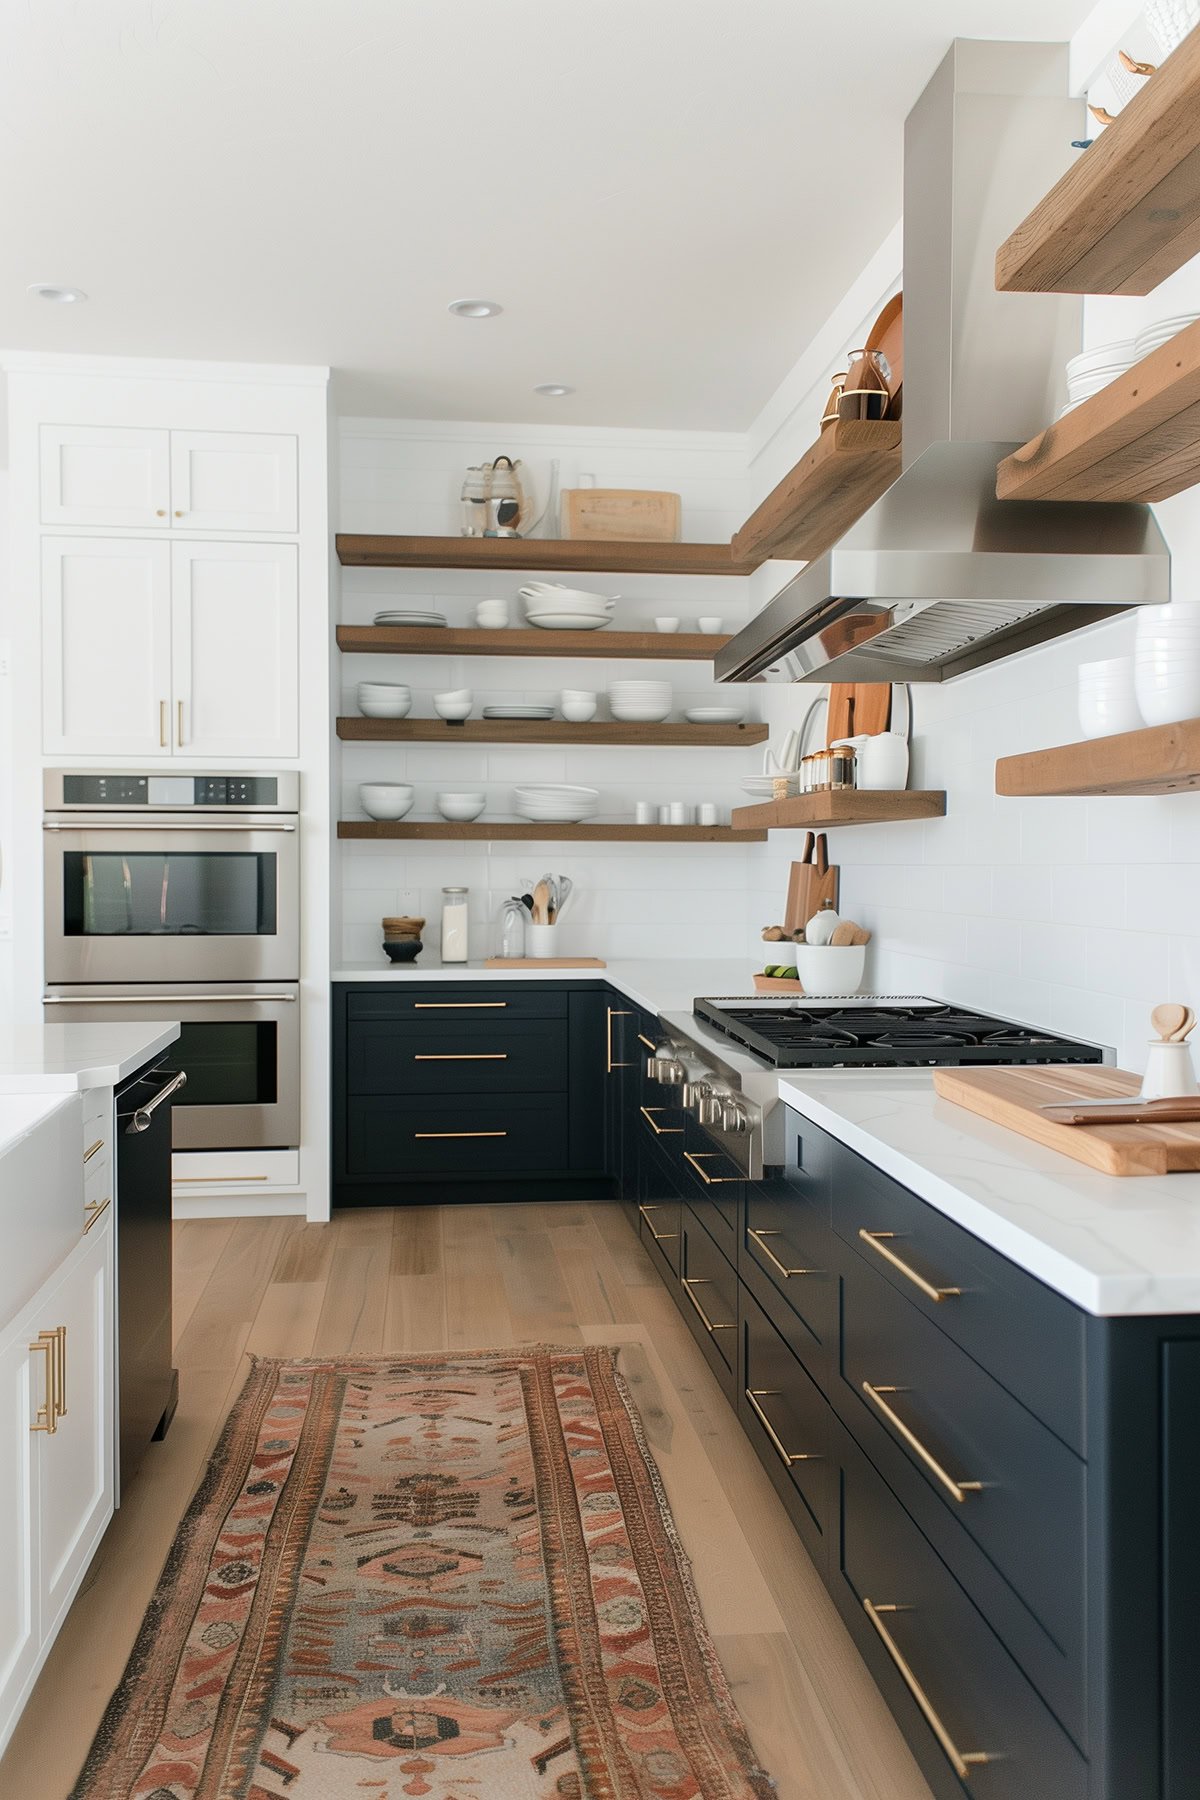 Black lower cabinets with natural wood floating shelves instead of upper cabinets.